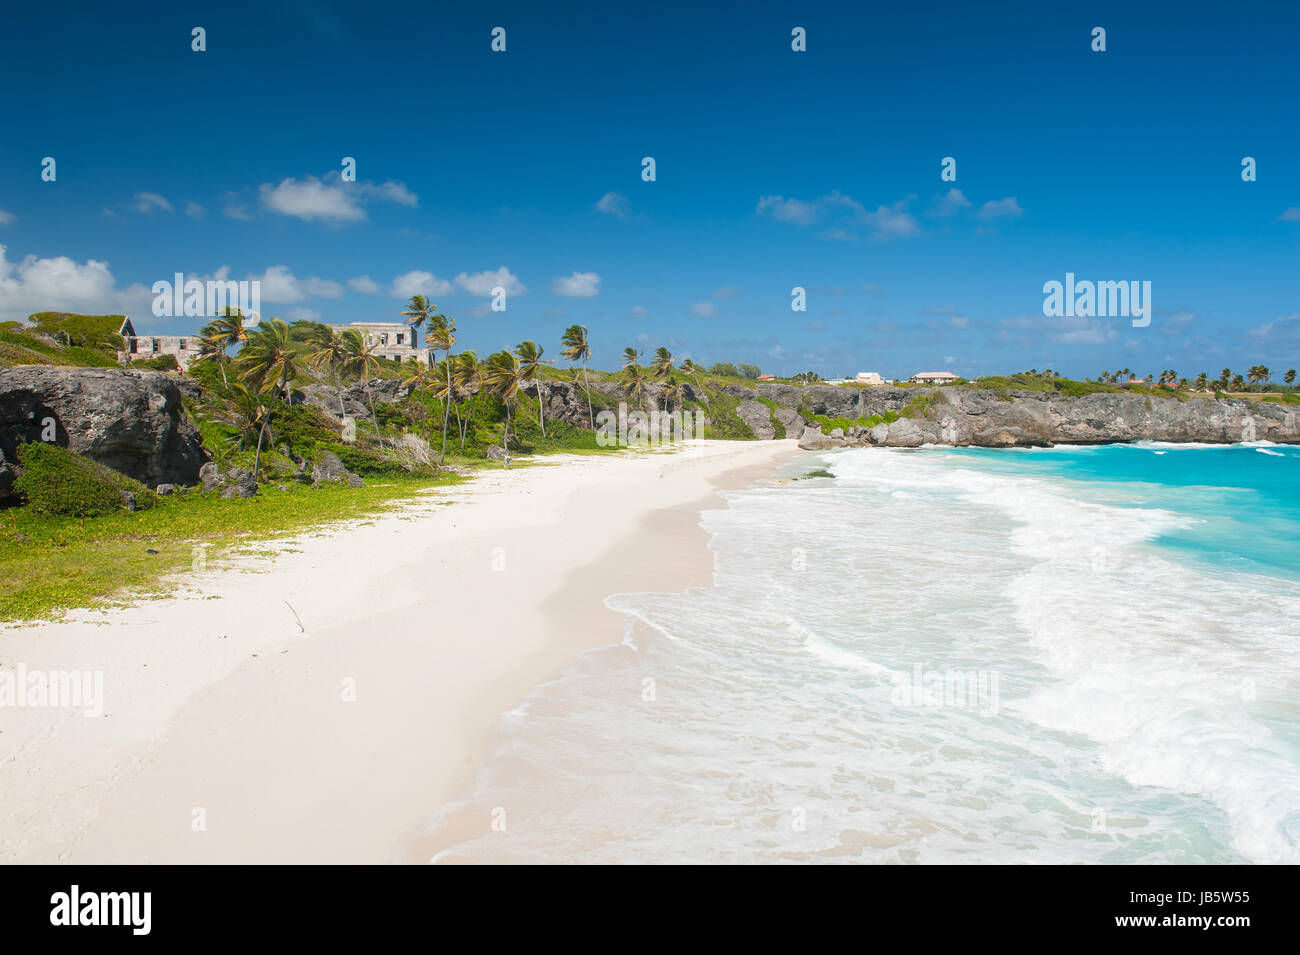 Harrismith Beach is one of the most beautiful beaches on the Caribbean island of Barbados. It is a tropical paradise with palms hanging over turquoise sea and a ruin of an old mansion on the cliff Stock Photo